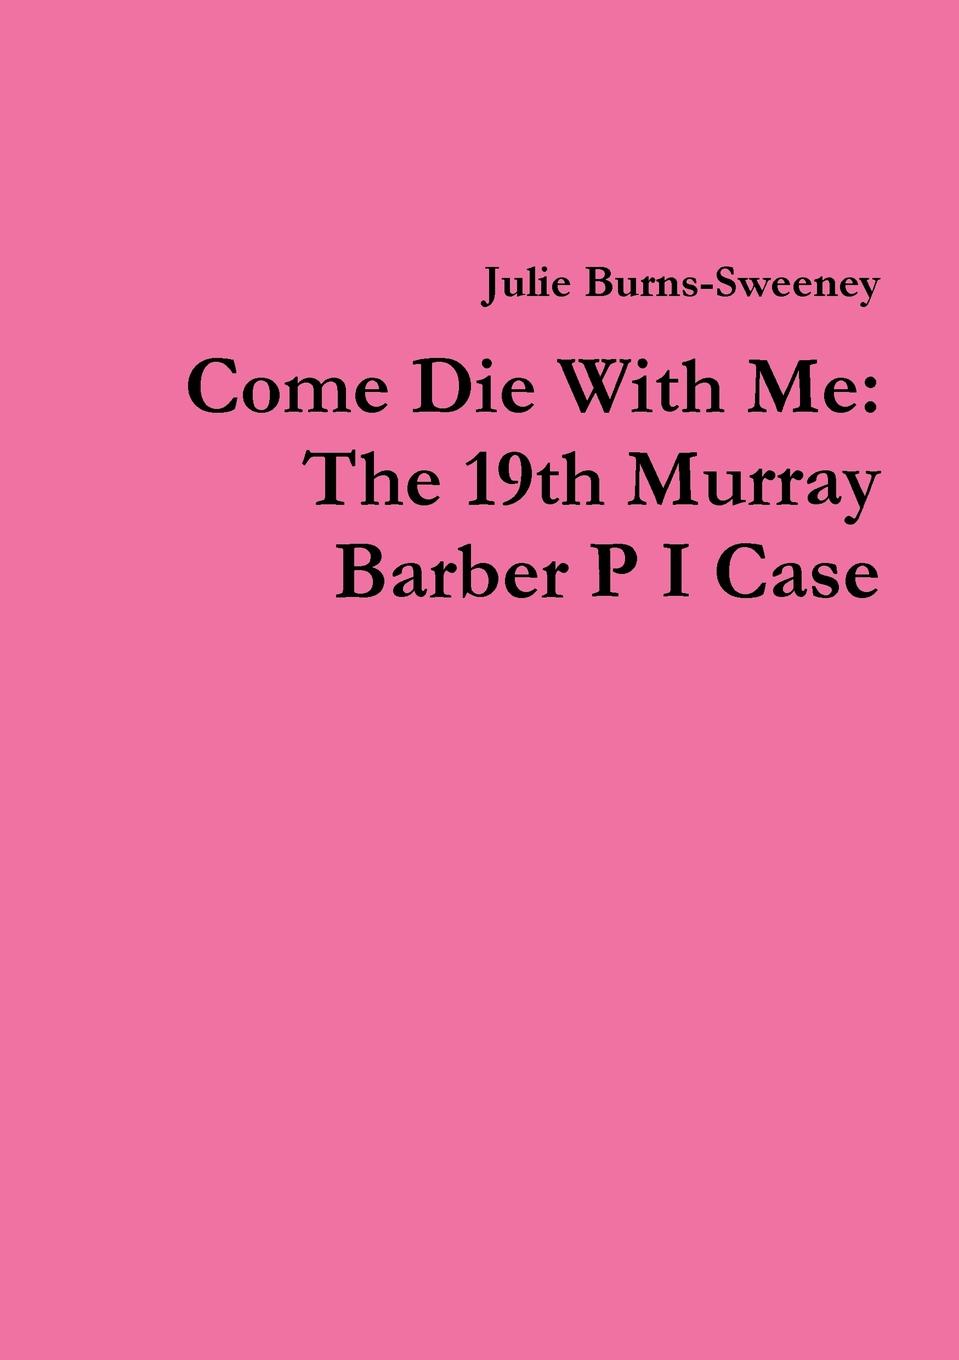 Julie Burns-Sweeney Come Die With Me. The 19th Murray Barber P I Case